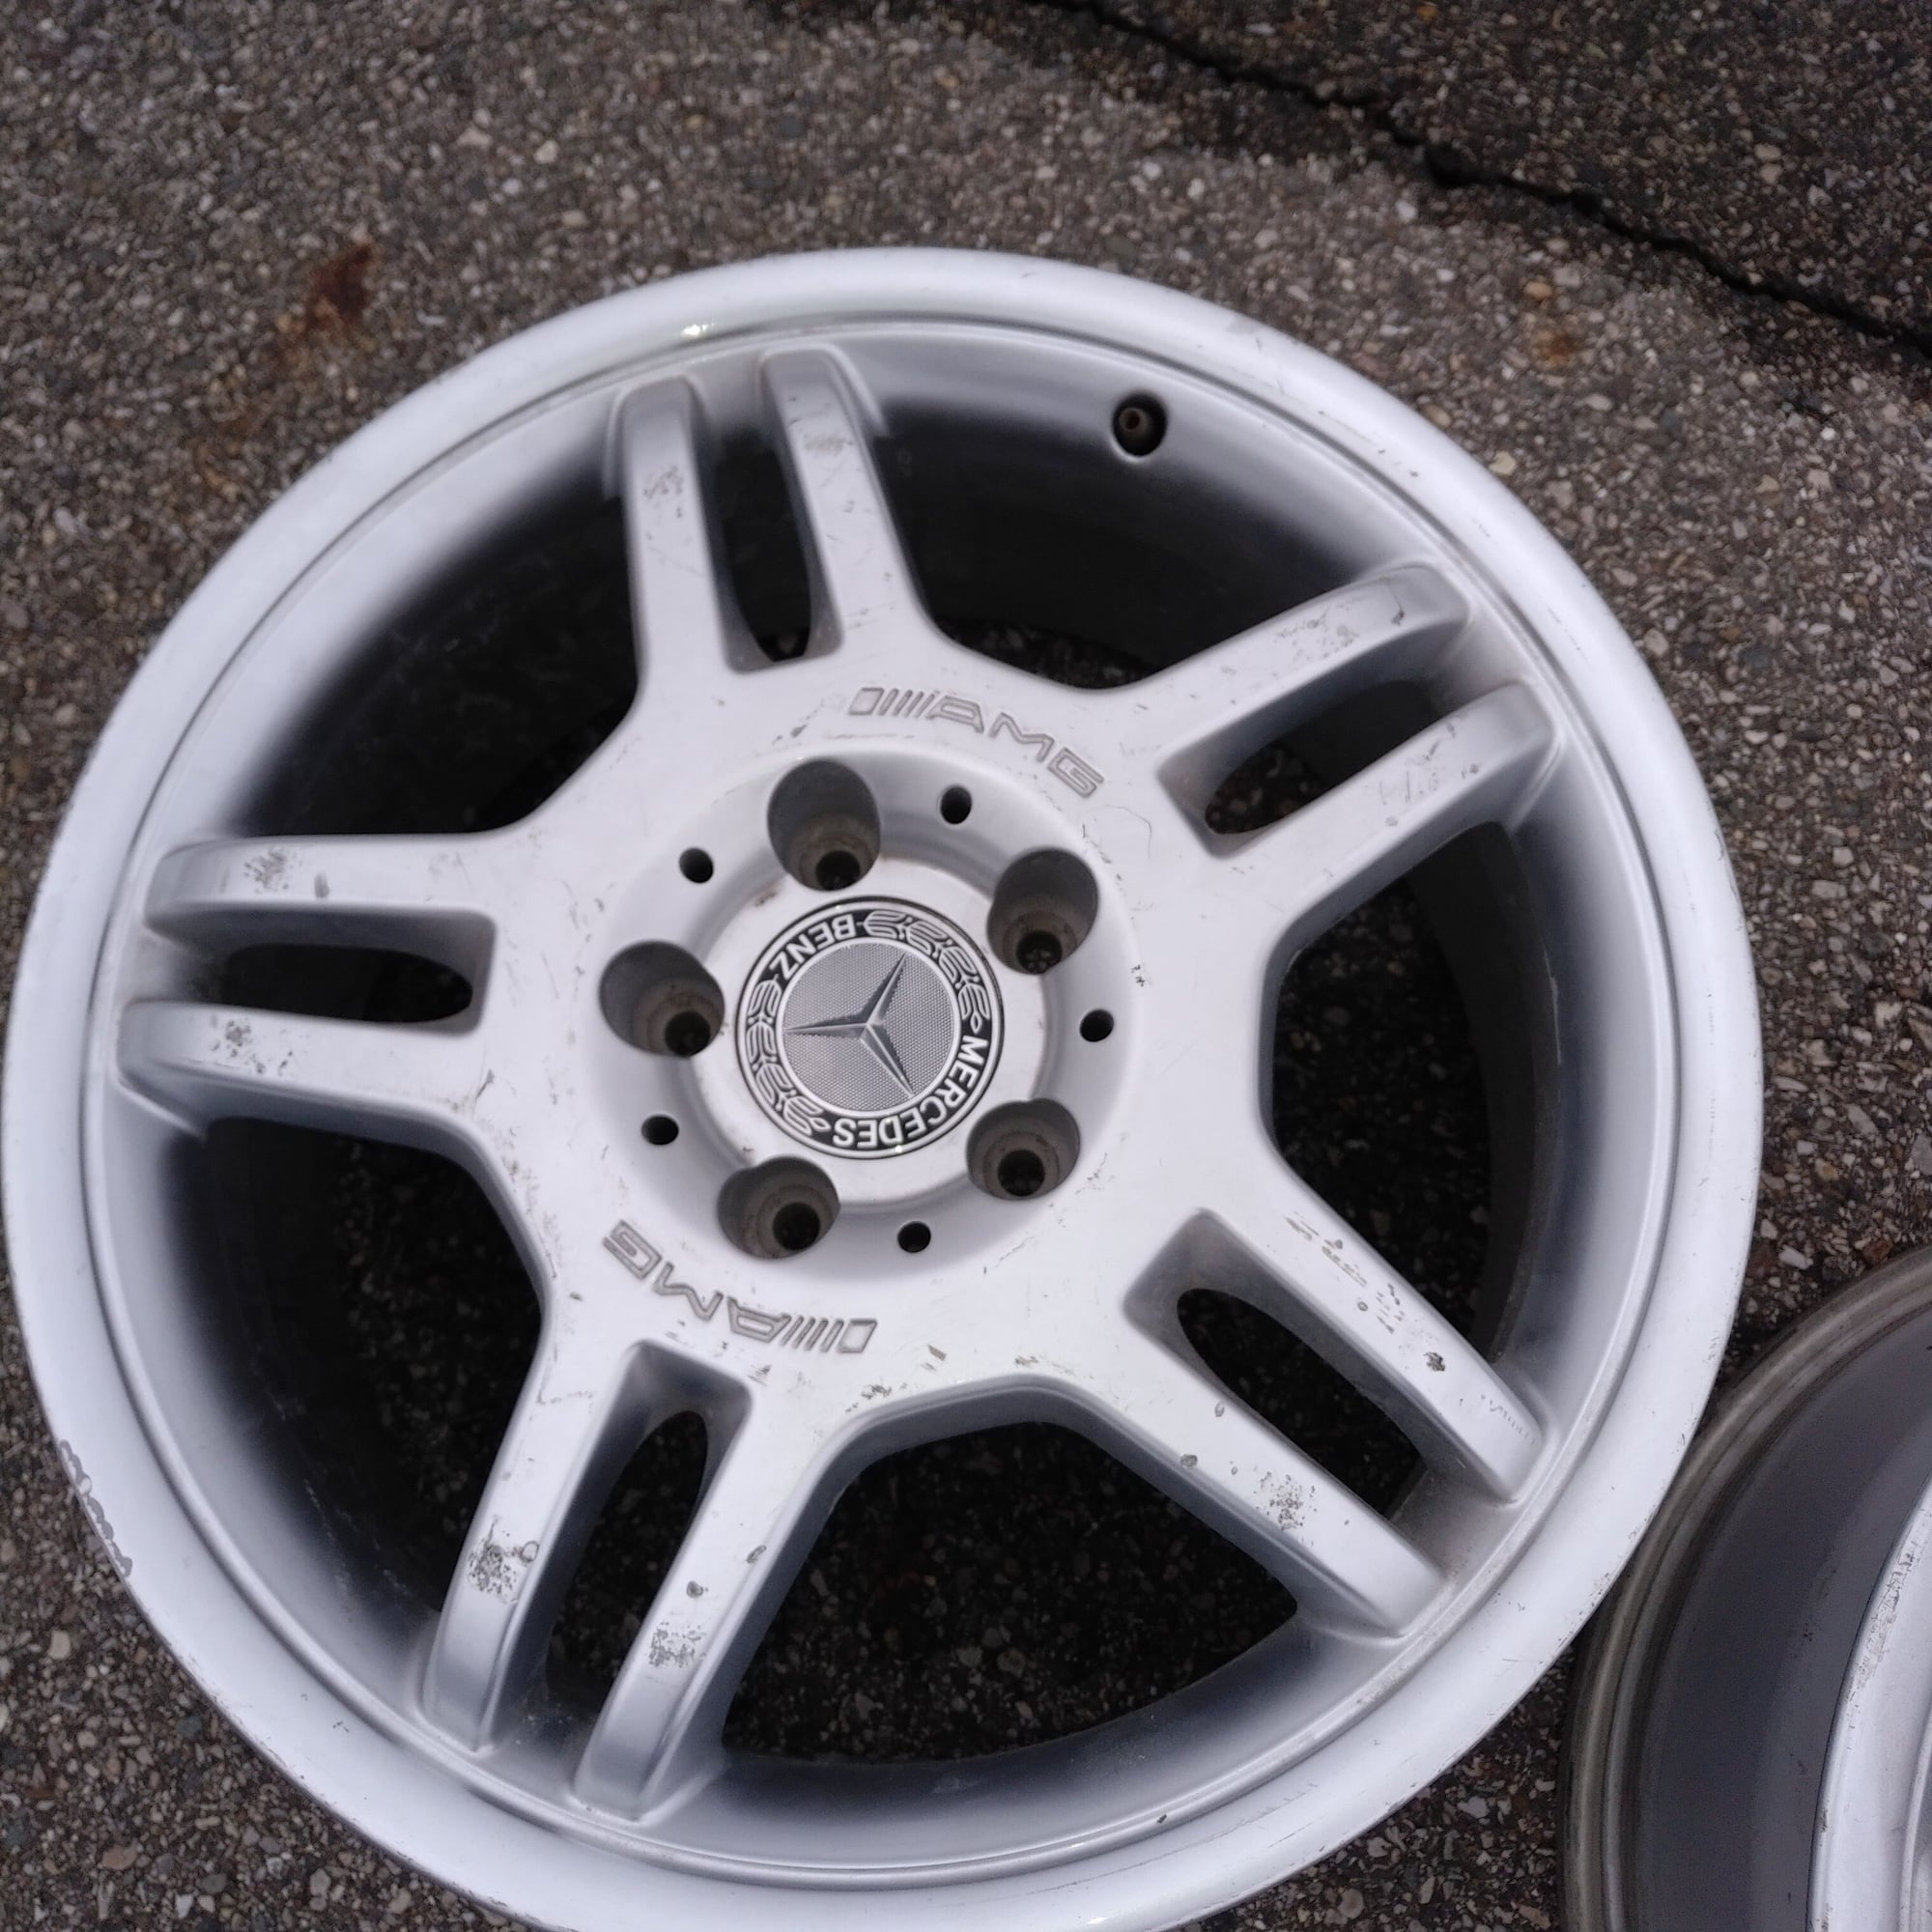 Wheels and Tires/Axles - AMG wheels from E63 and others - New - 2002 to 2010 Mercedes-Benz E63 AMG - Birmingham, MI 48009, United States